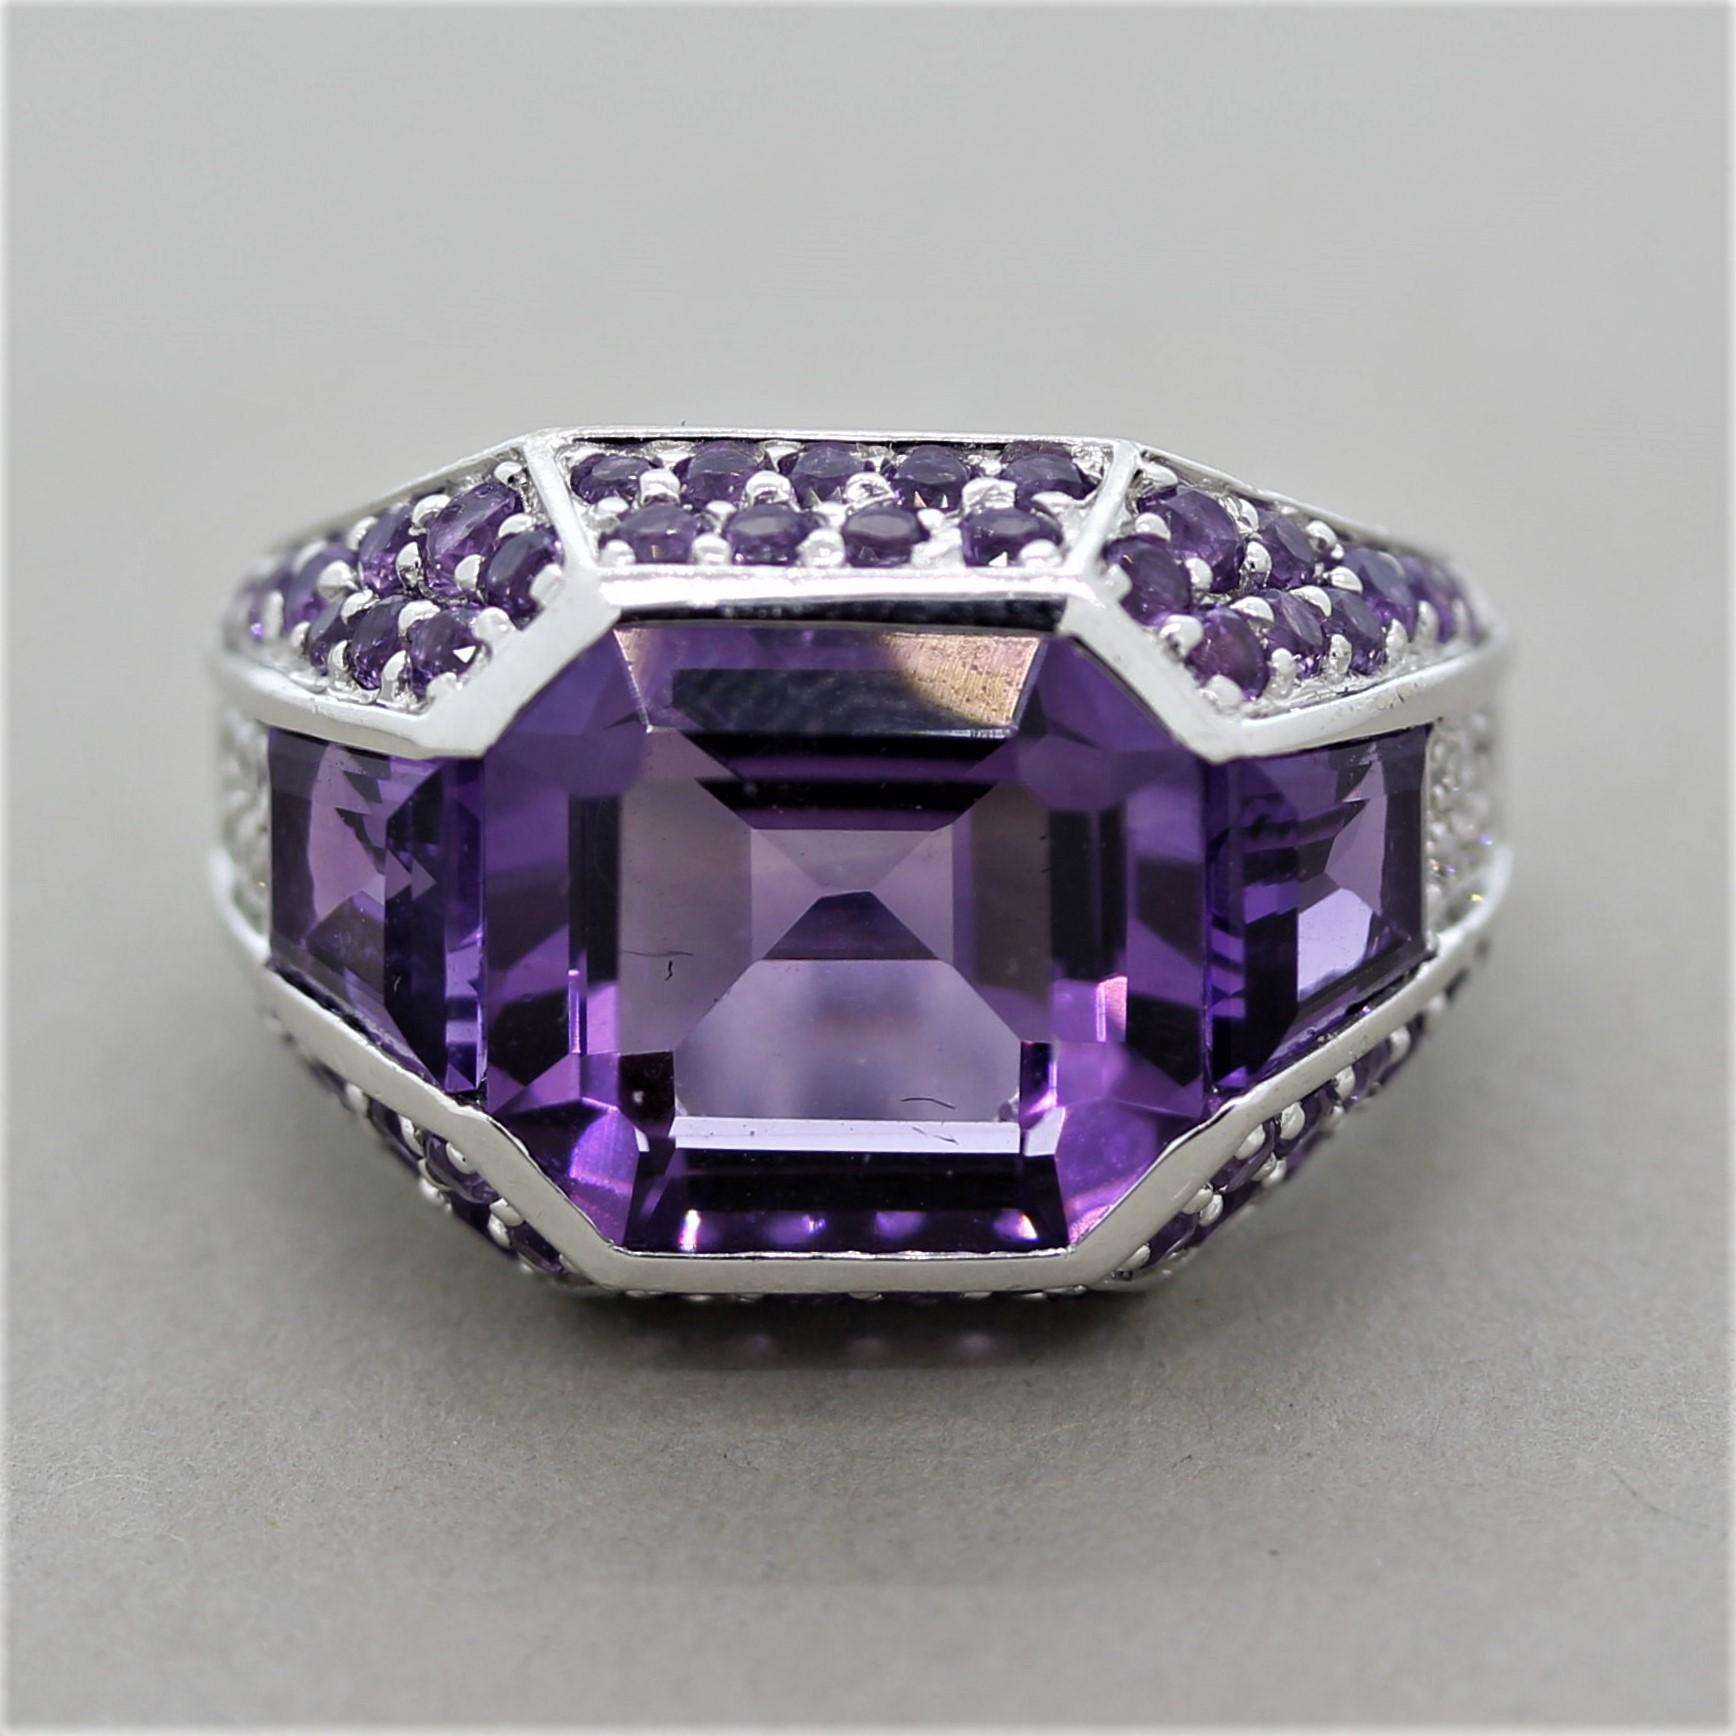 A sleek and elegant ring featuring a large square shaped amethyst. It has a bright purple color and is free of any visible inclusions allowing the brilliance of the stone to come out. It is accented by additional amethysts which are round cut and